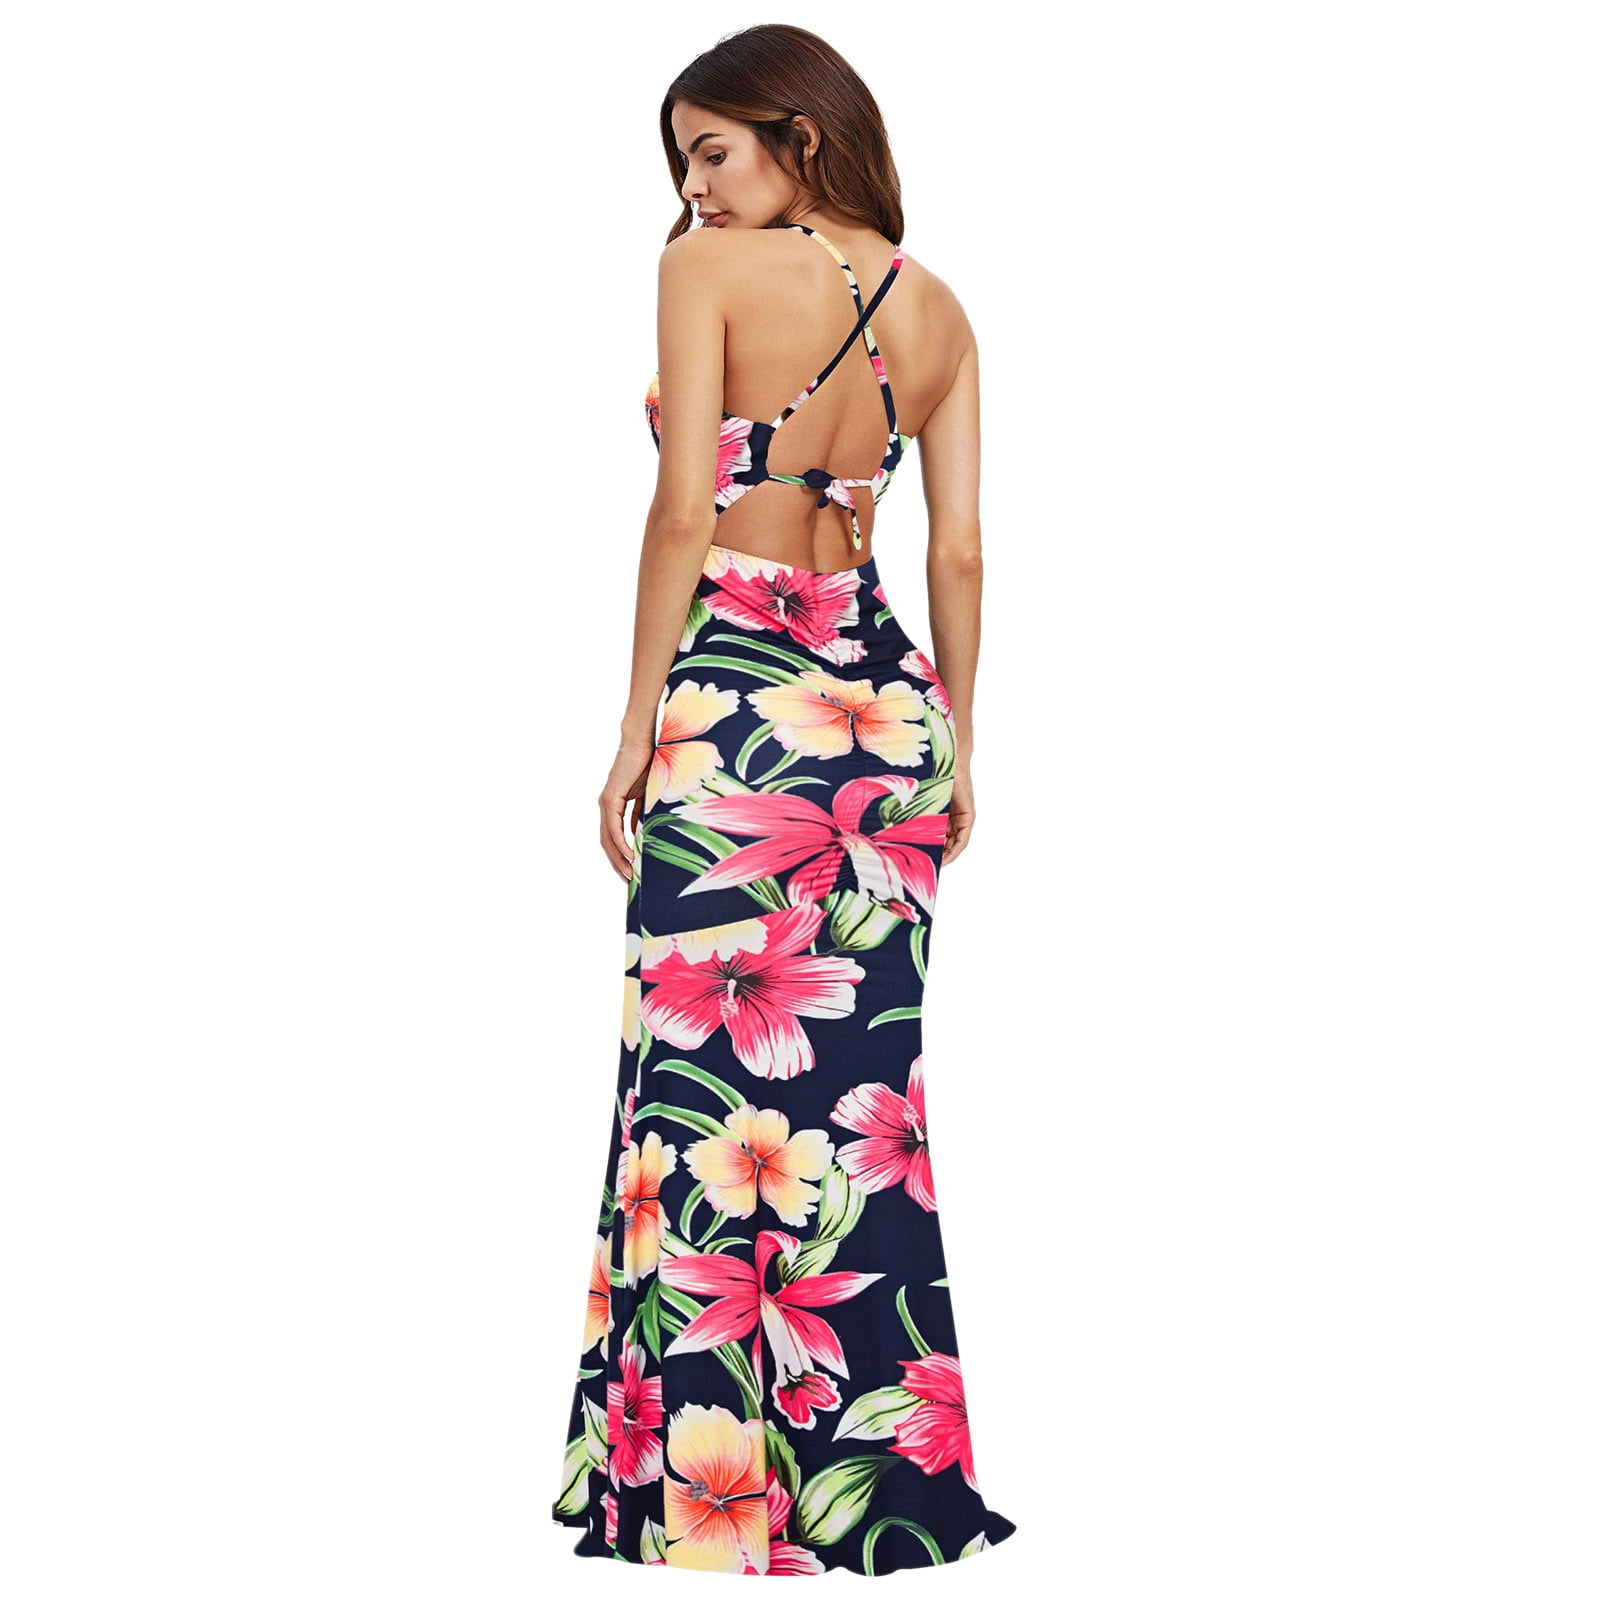 〖hellobye〗women Sexy O Neck Floral Print Strappy Backless Summer Evening Party Maxi Dress